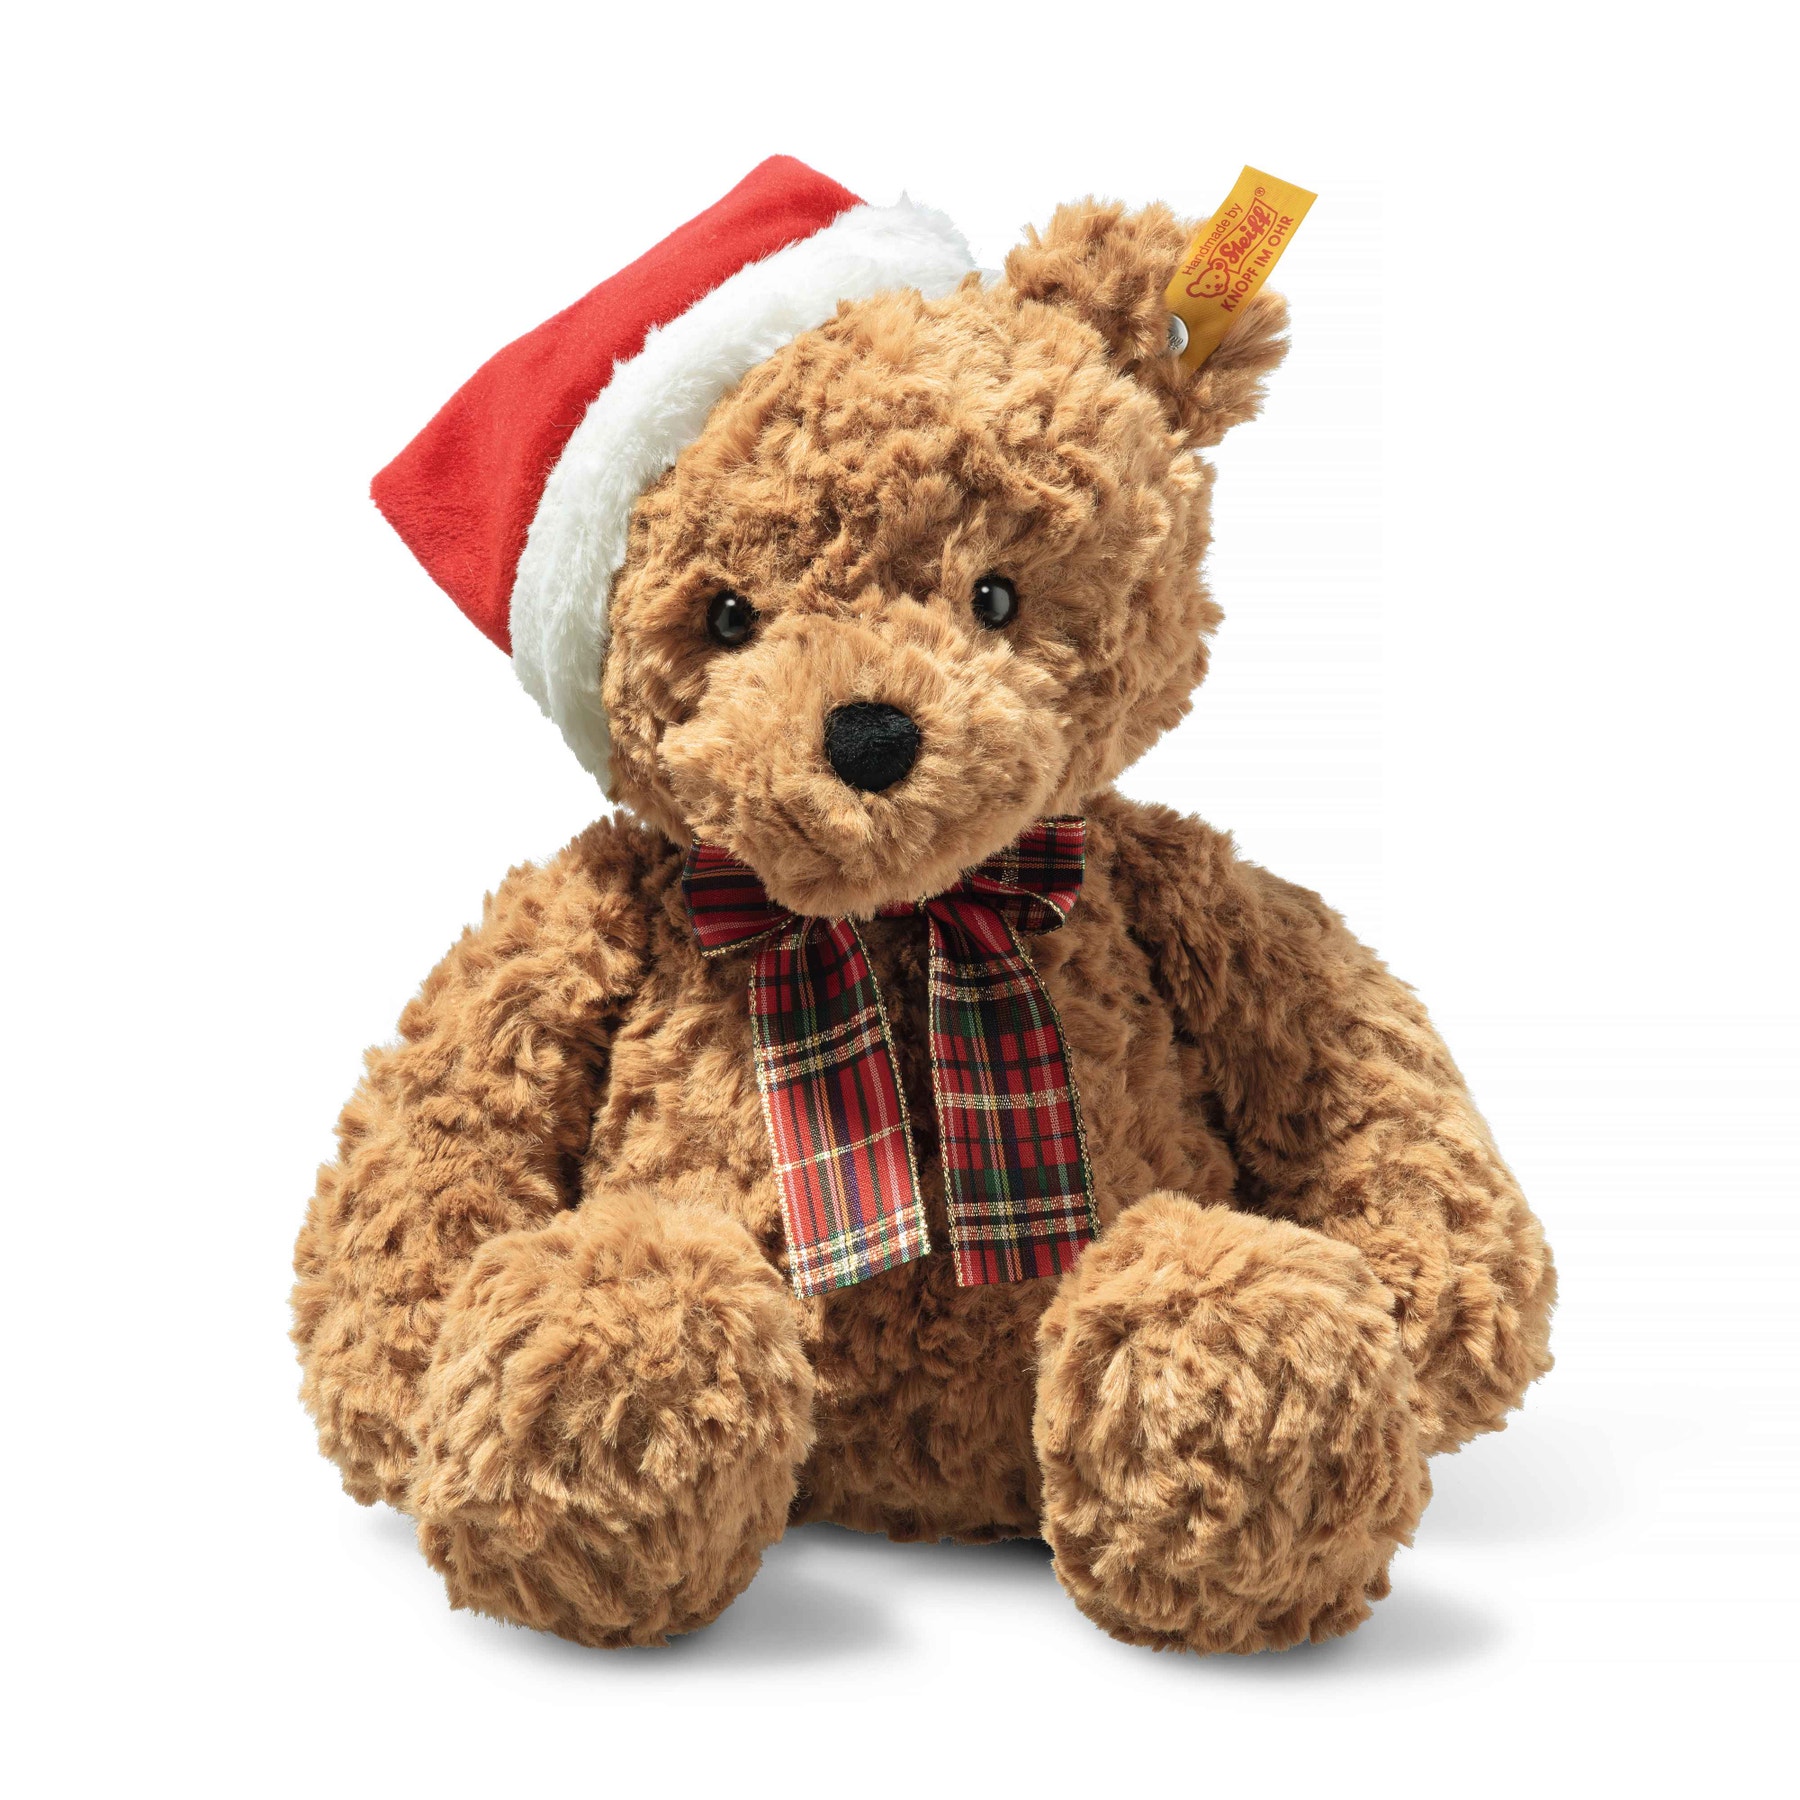 Jimmy Christmas Teddy Bear with Santa Hat and Bow, 12 in, brown